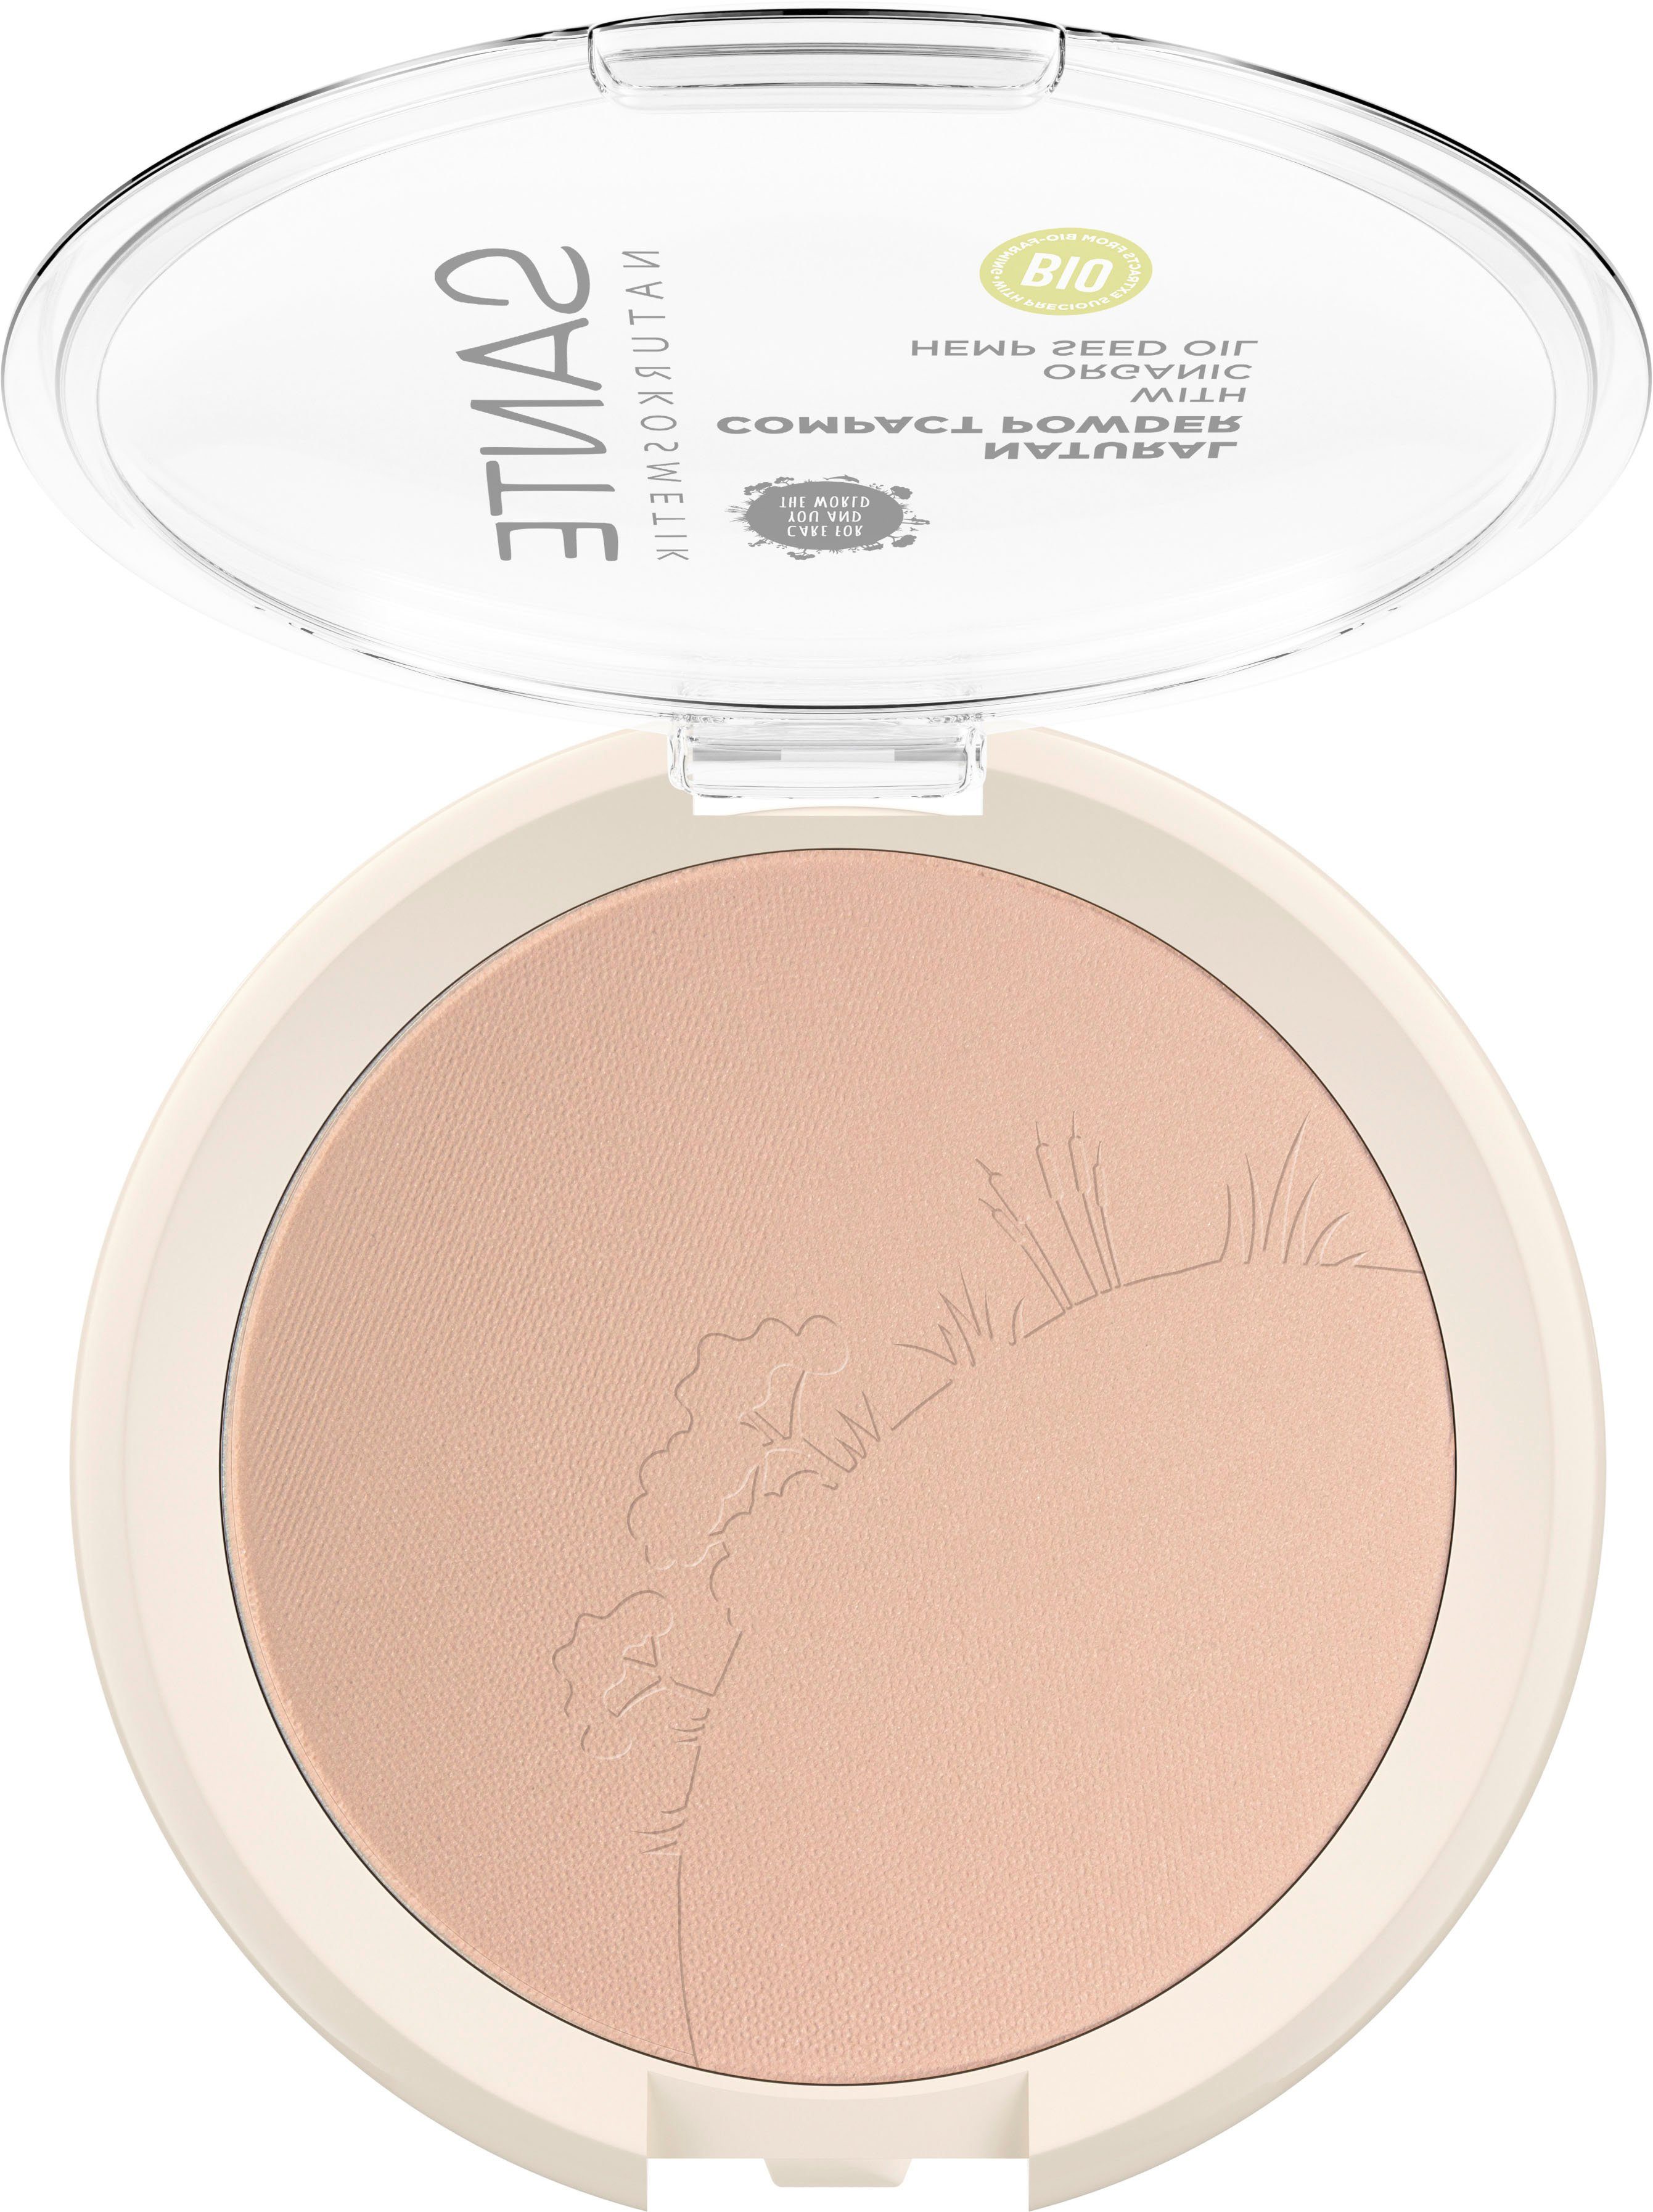 Cool 01 Puder Natural Ivory SANTE Compact Powder